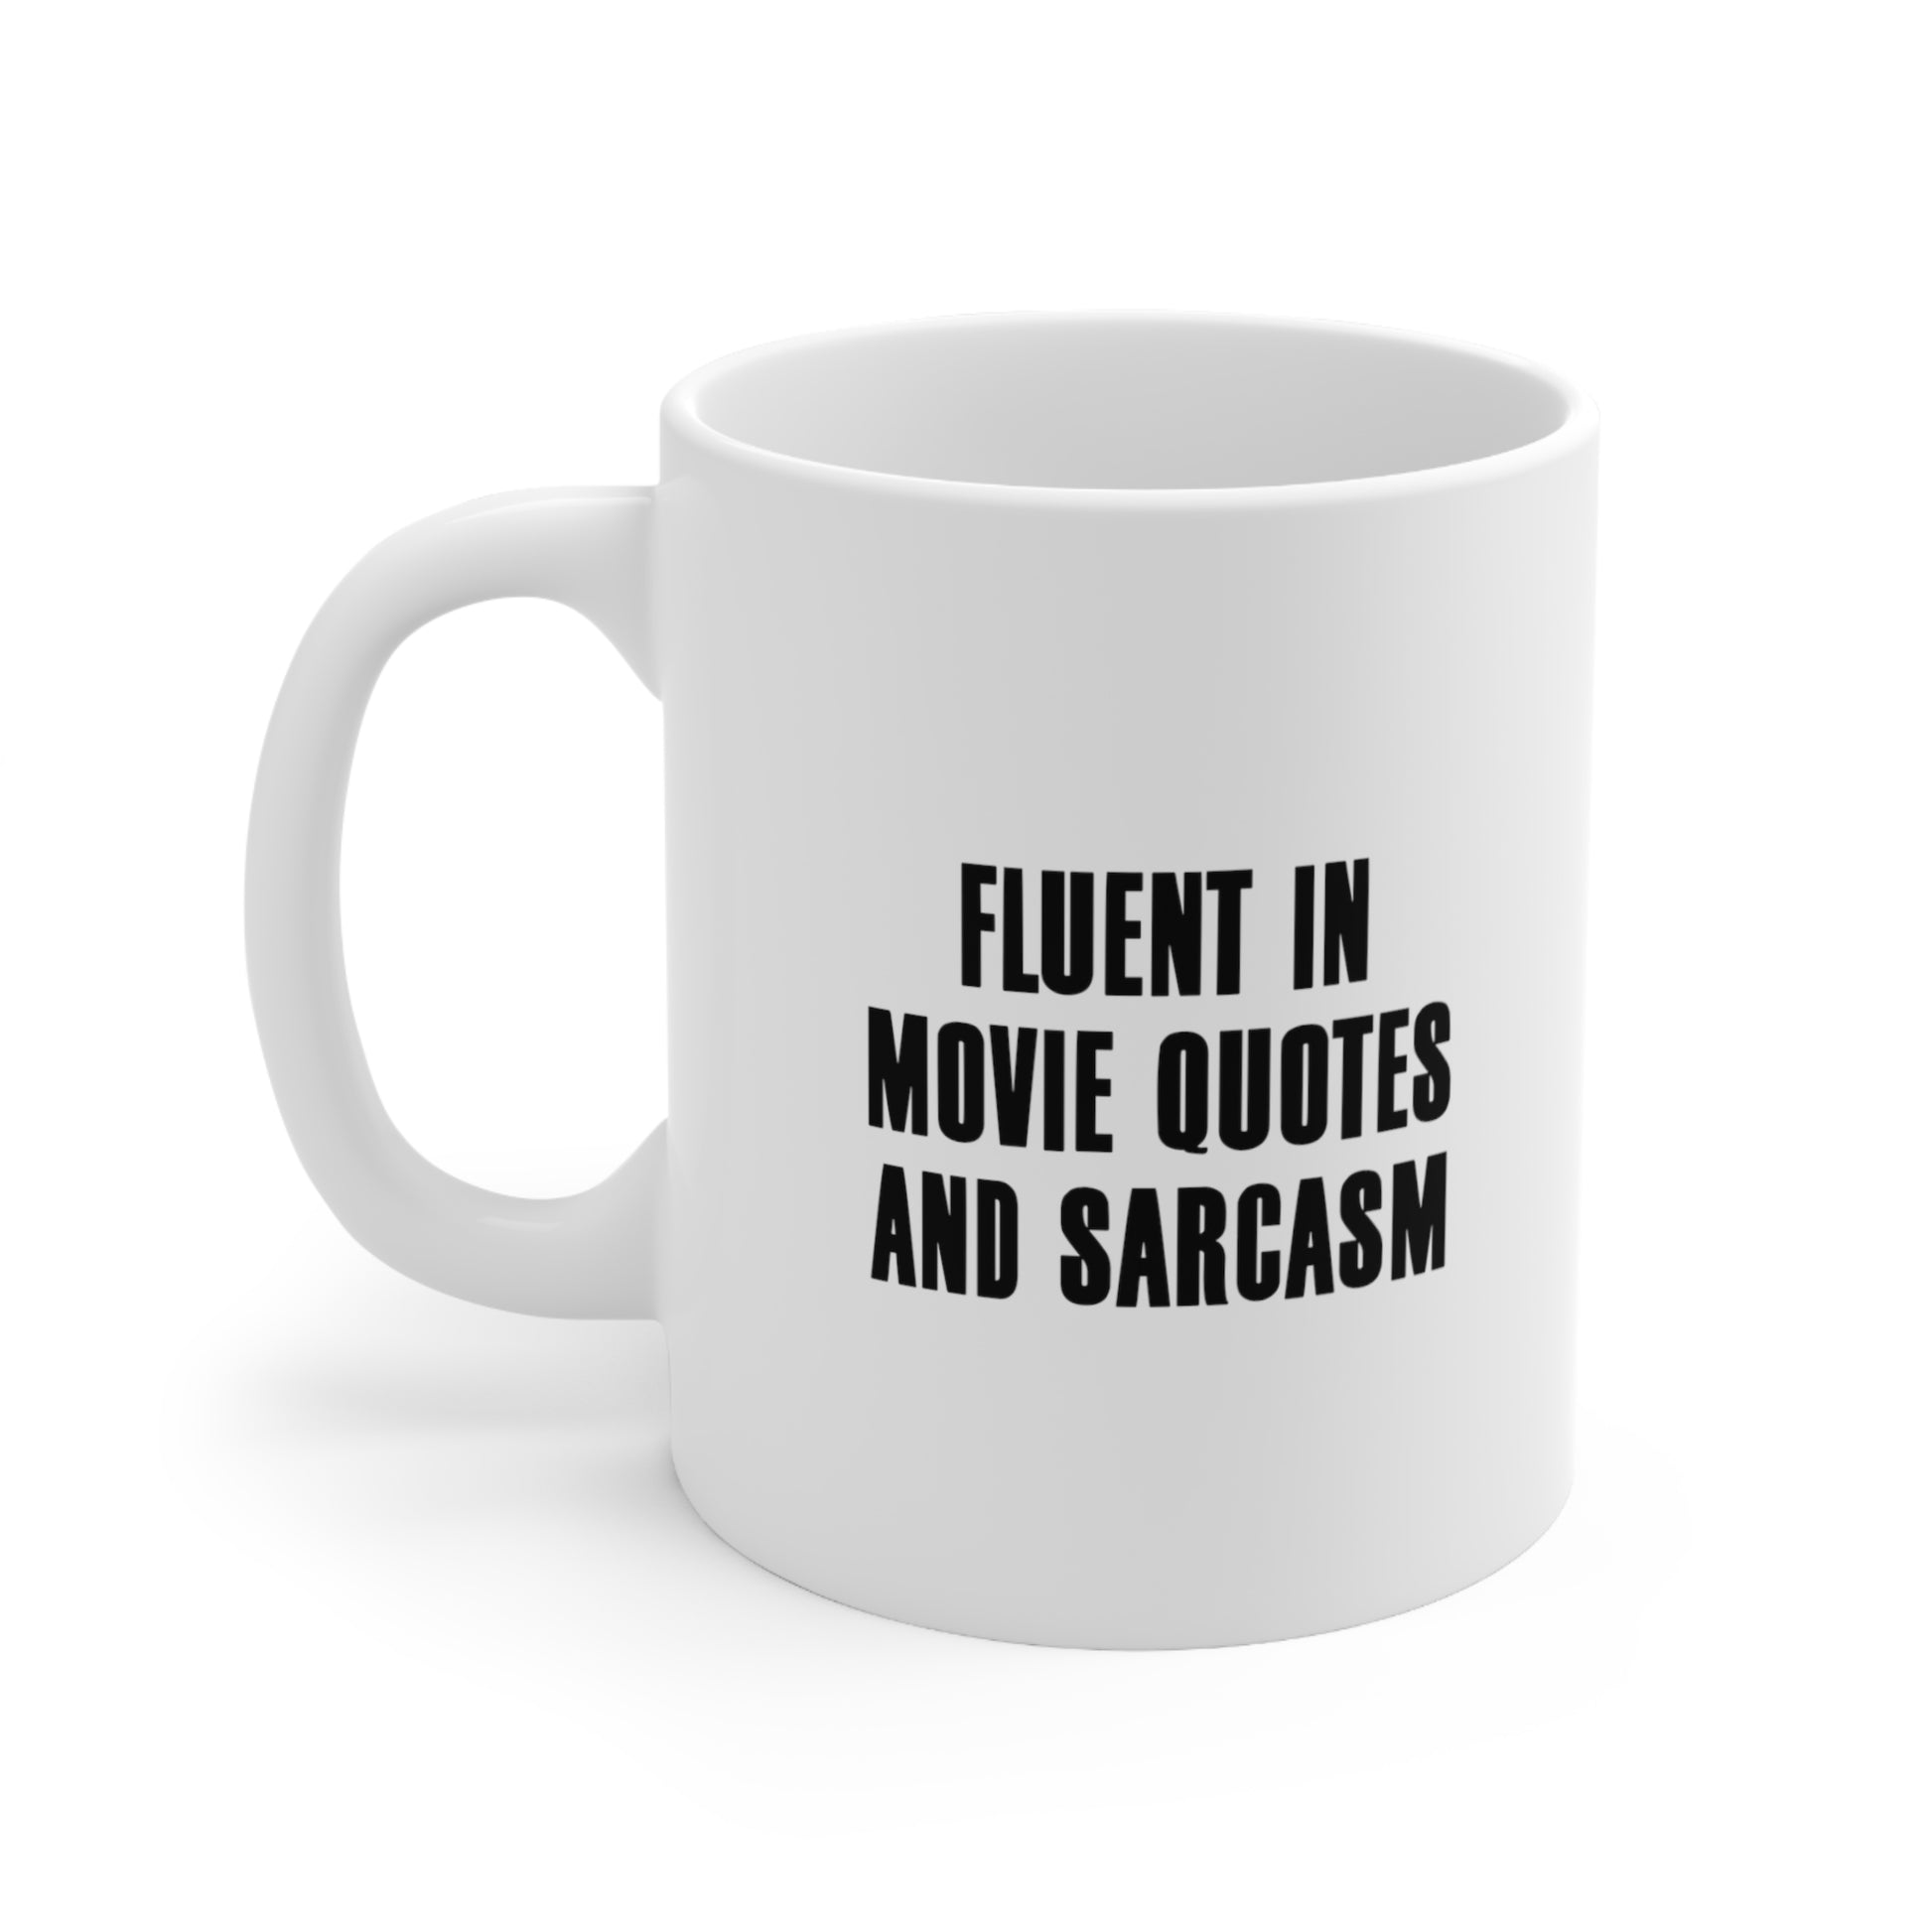 Fluent in Movie Quotes and Sarcasm Coffee Mug